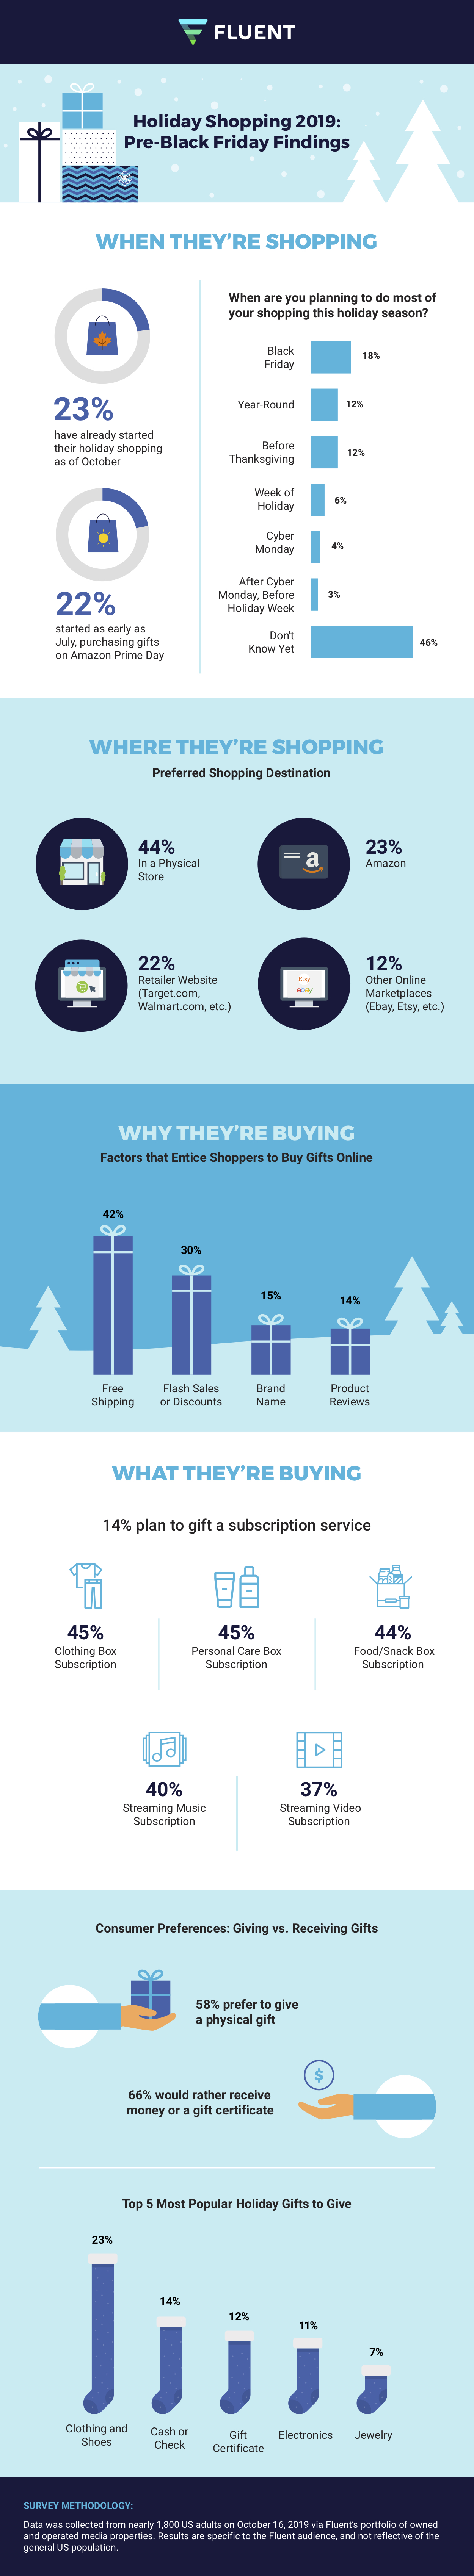 Infographic on Holiday Shopping 2019: Pre-Black Friday Findings 